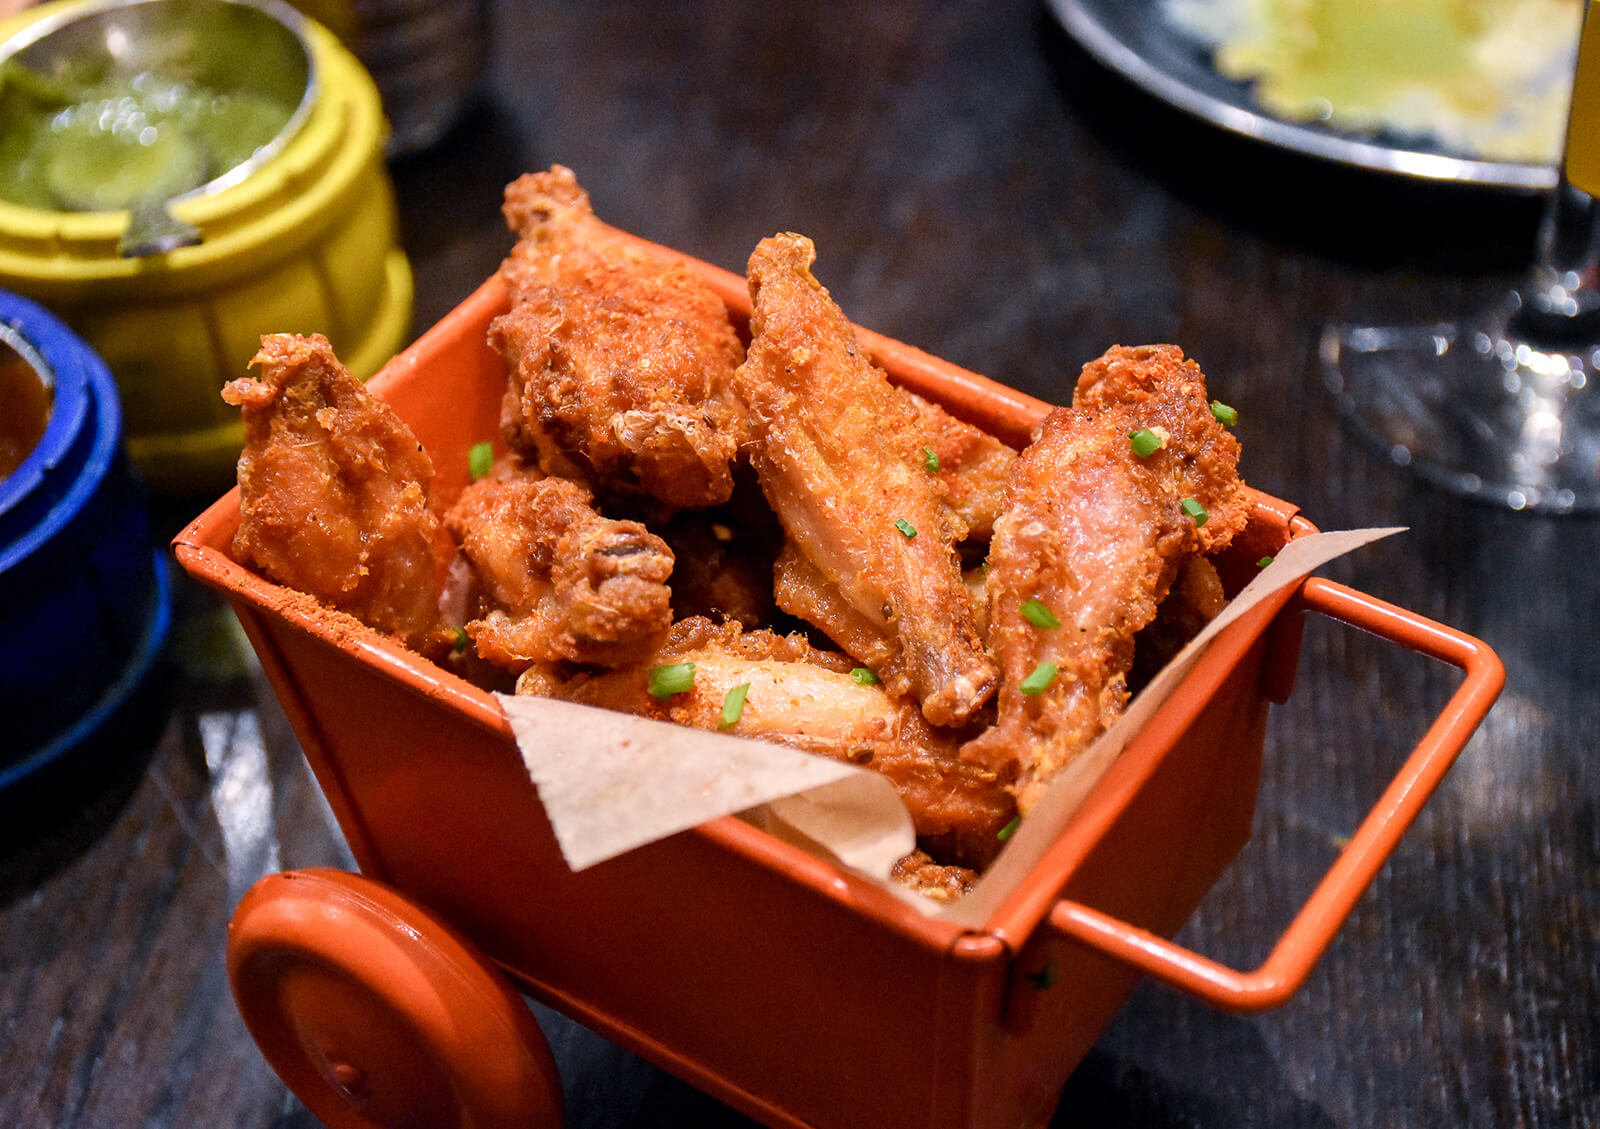 Soho Wala Brings Small Plated Street Food Delights To Central London